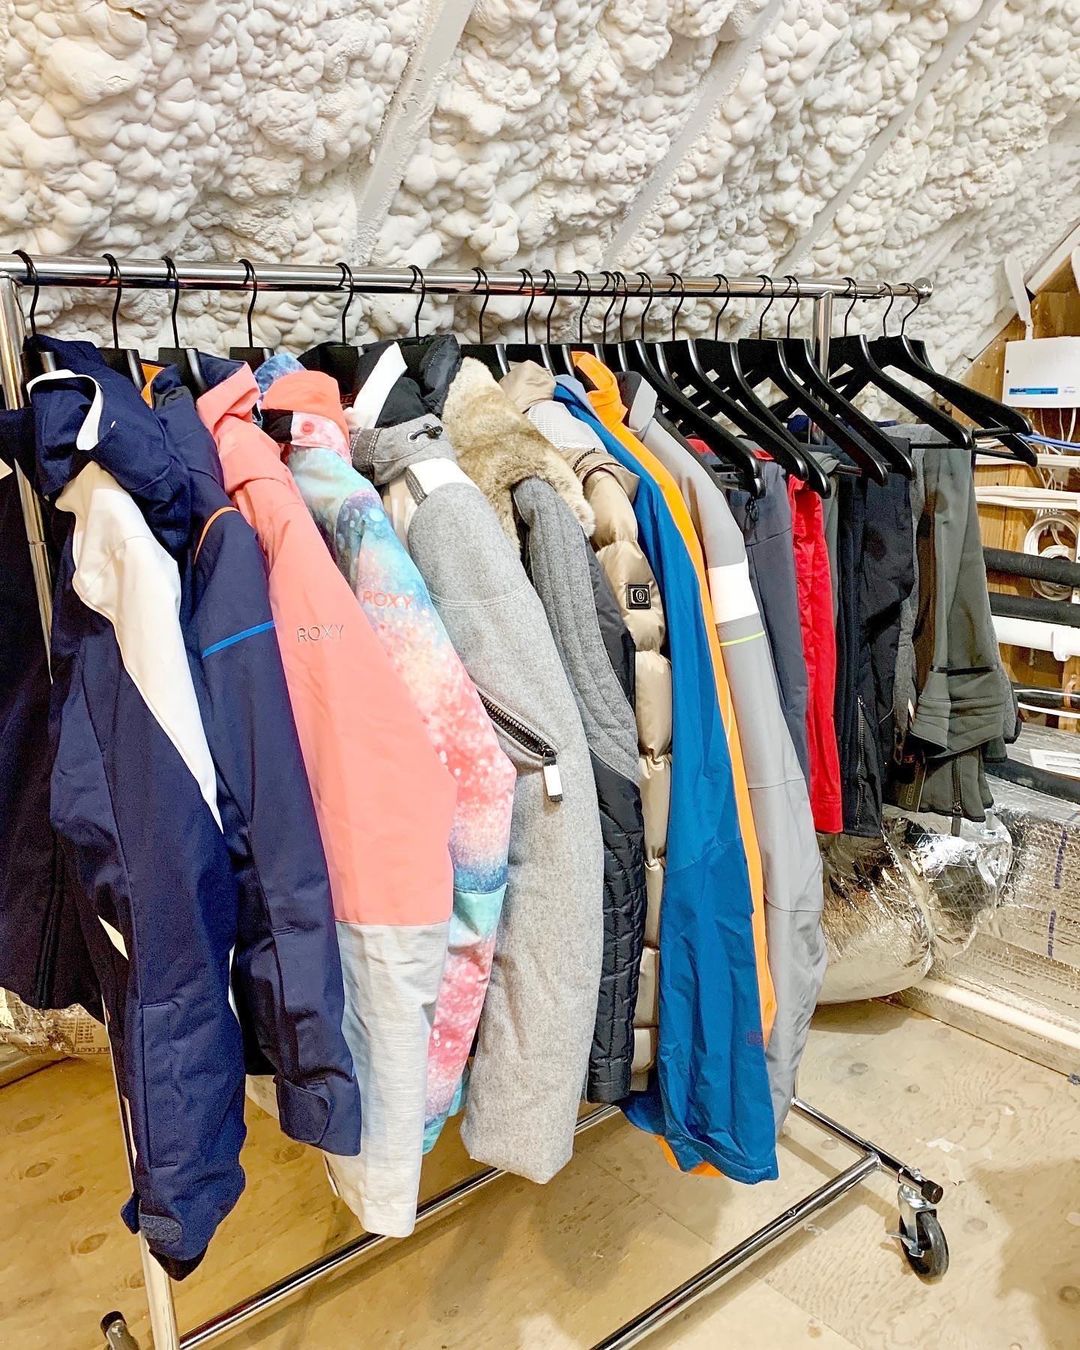 Coats Hung on a Clothing Rack in an Attic. Photo by Instagram user @getitdonebystephanie